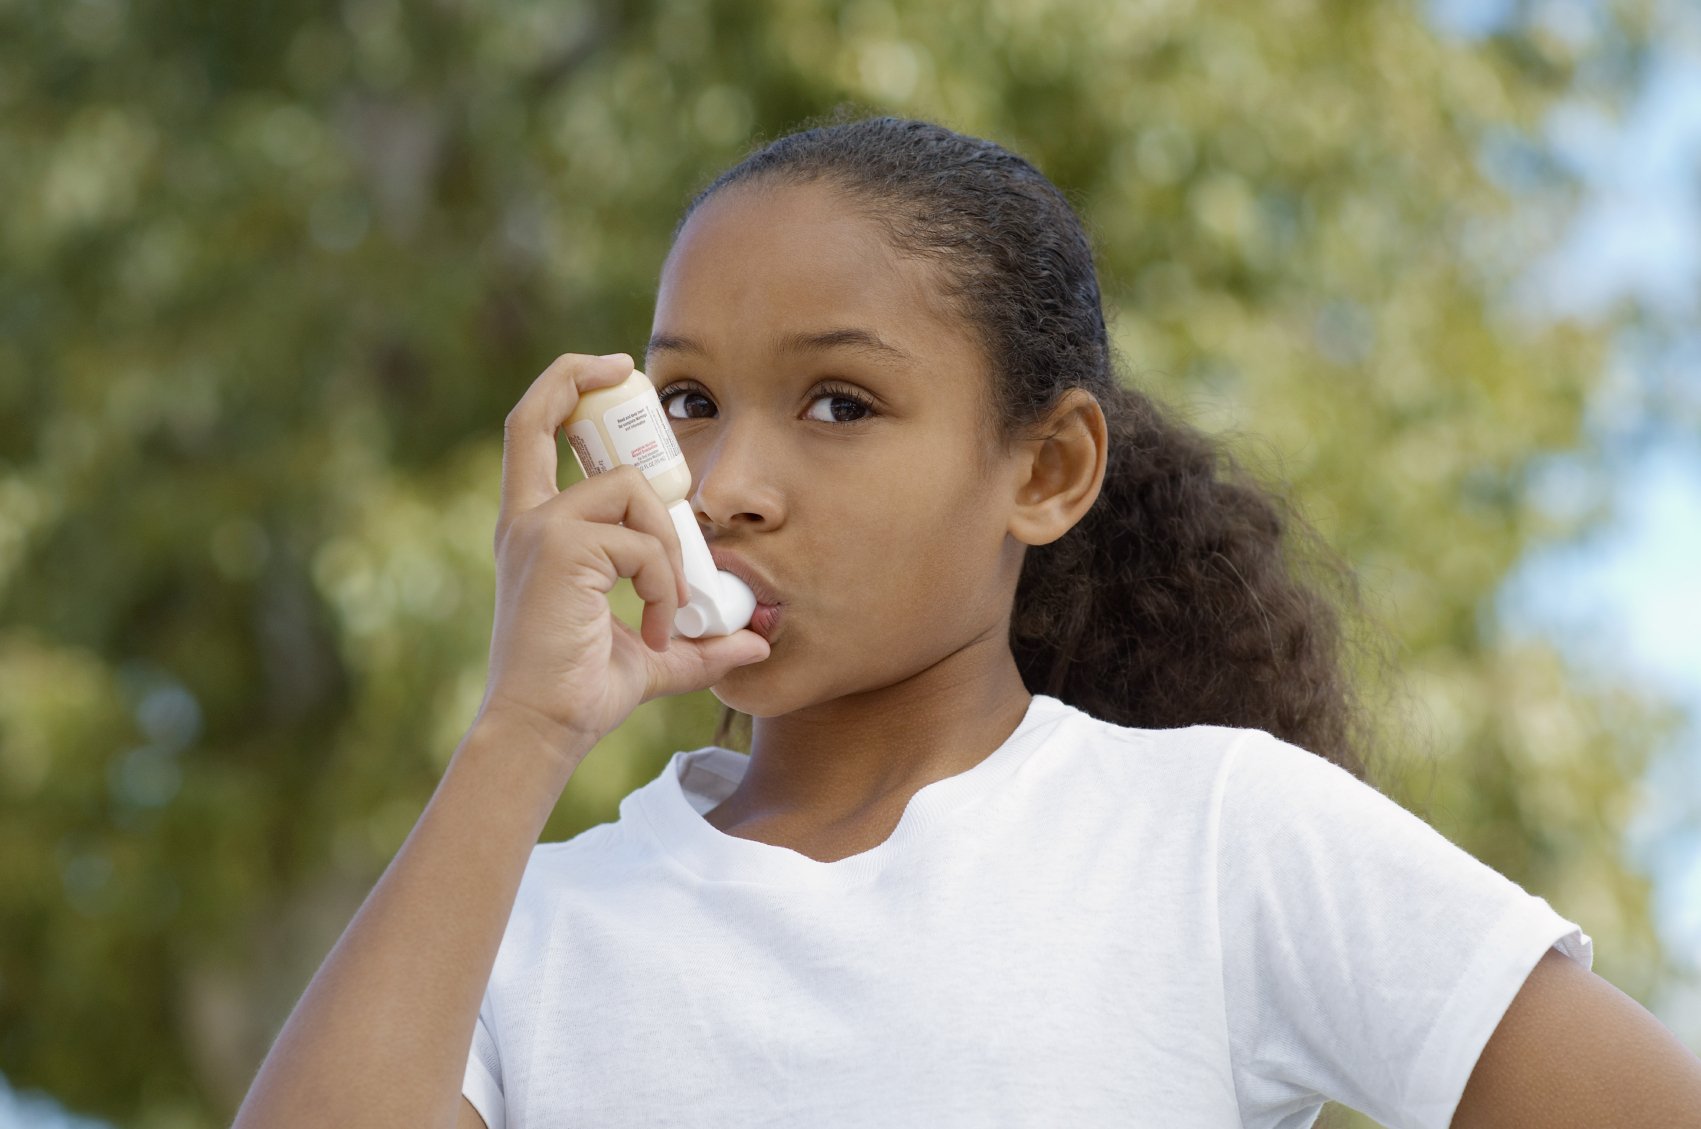 A New Discovery for Pediatric Asthma Patients